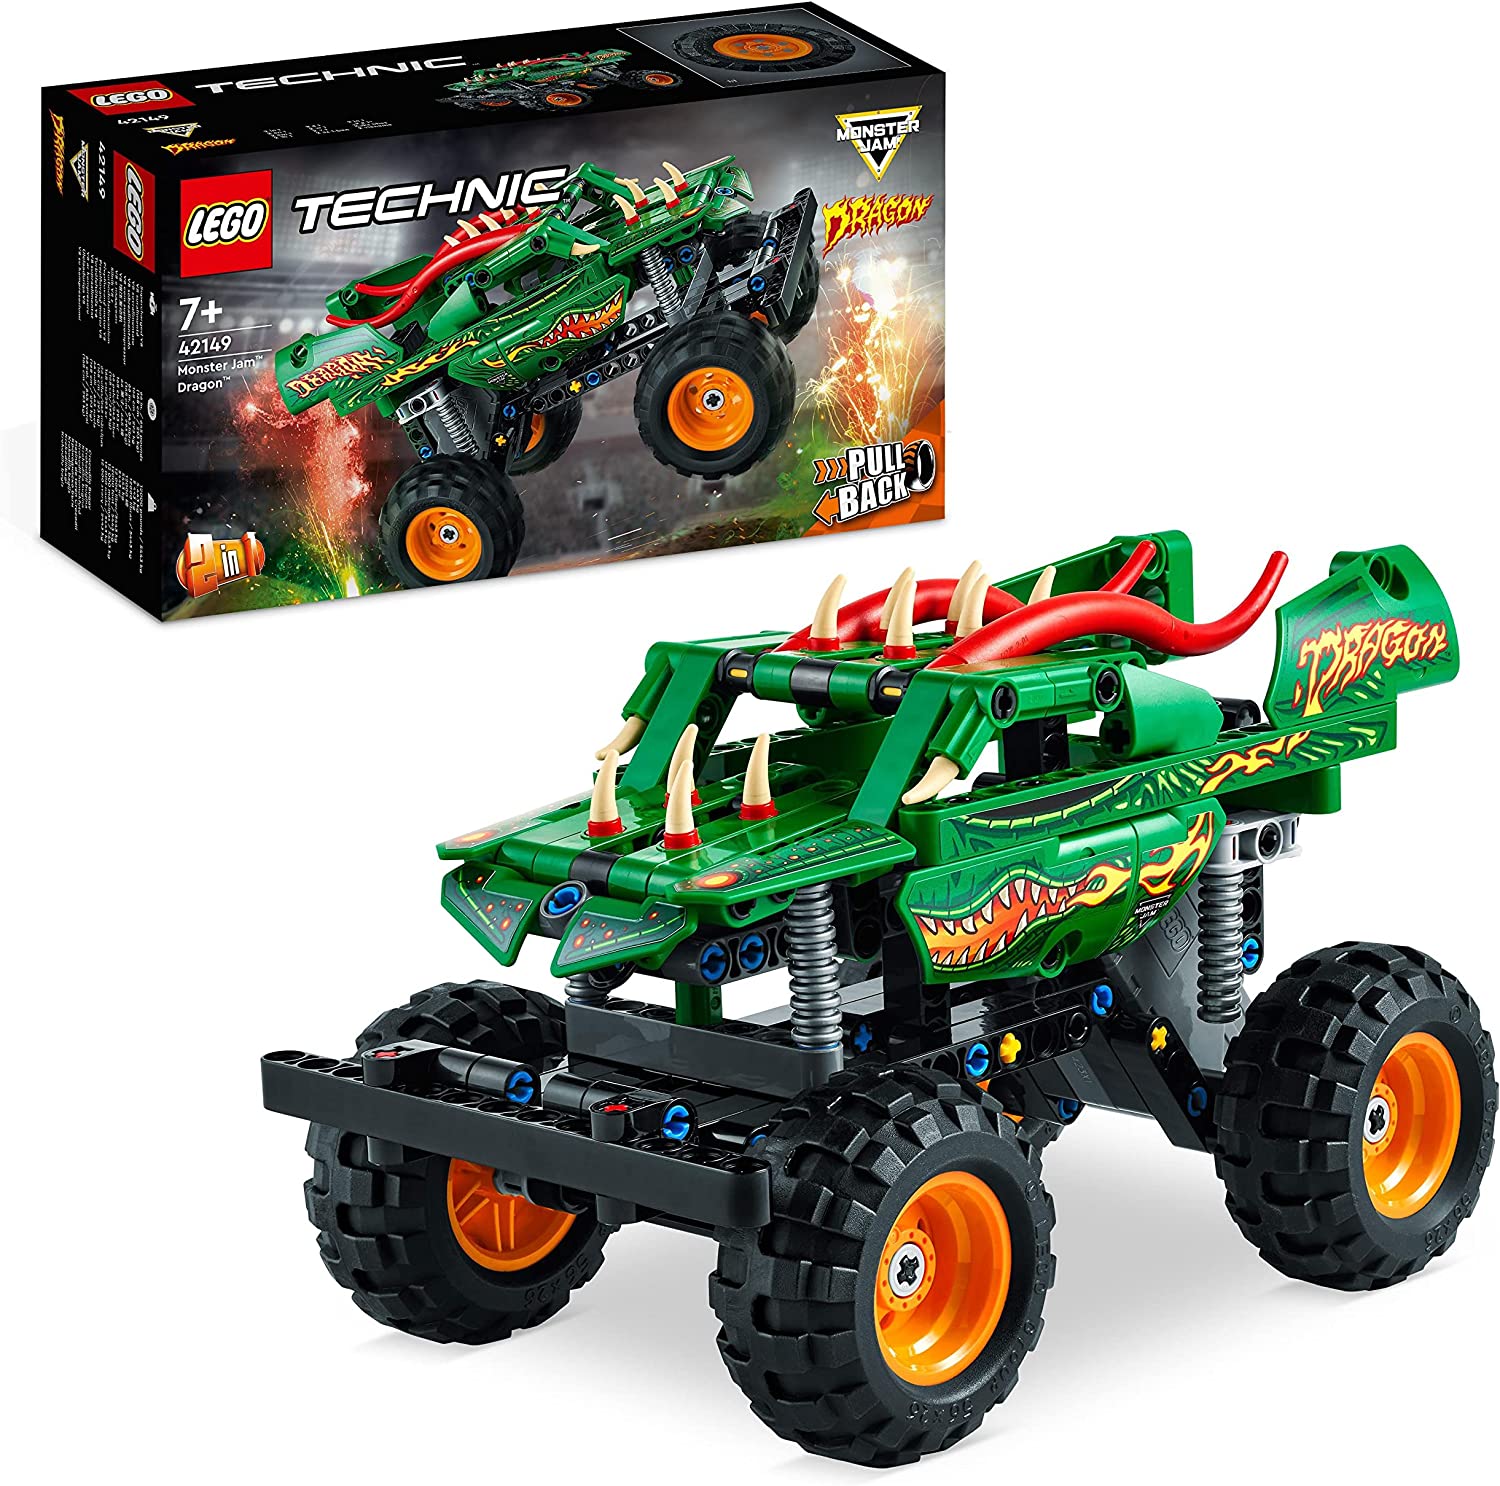 LEGO 42149 Technic Monster Jam Dragon, Monster Truck Toy for Boys and Girls, 2-in-1 Racing Car for Off-Road Stunts and Kids Gift